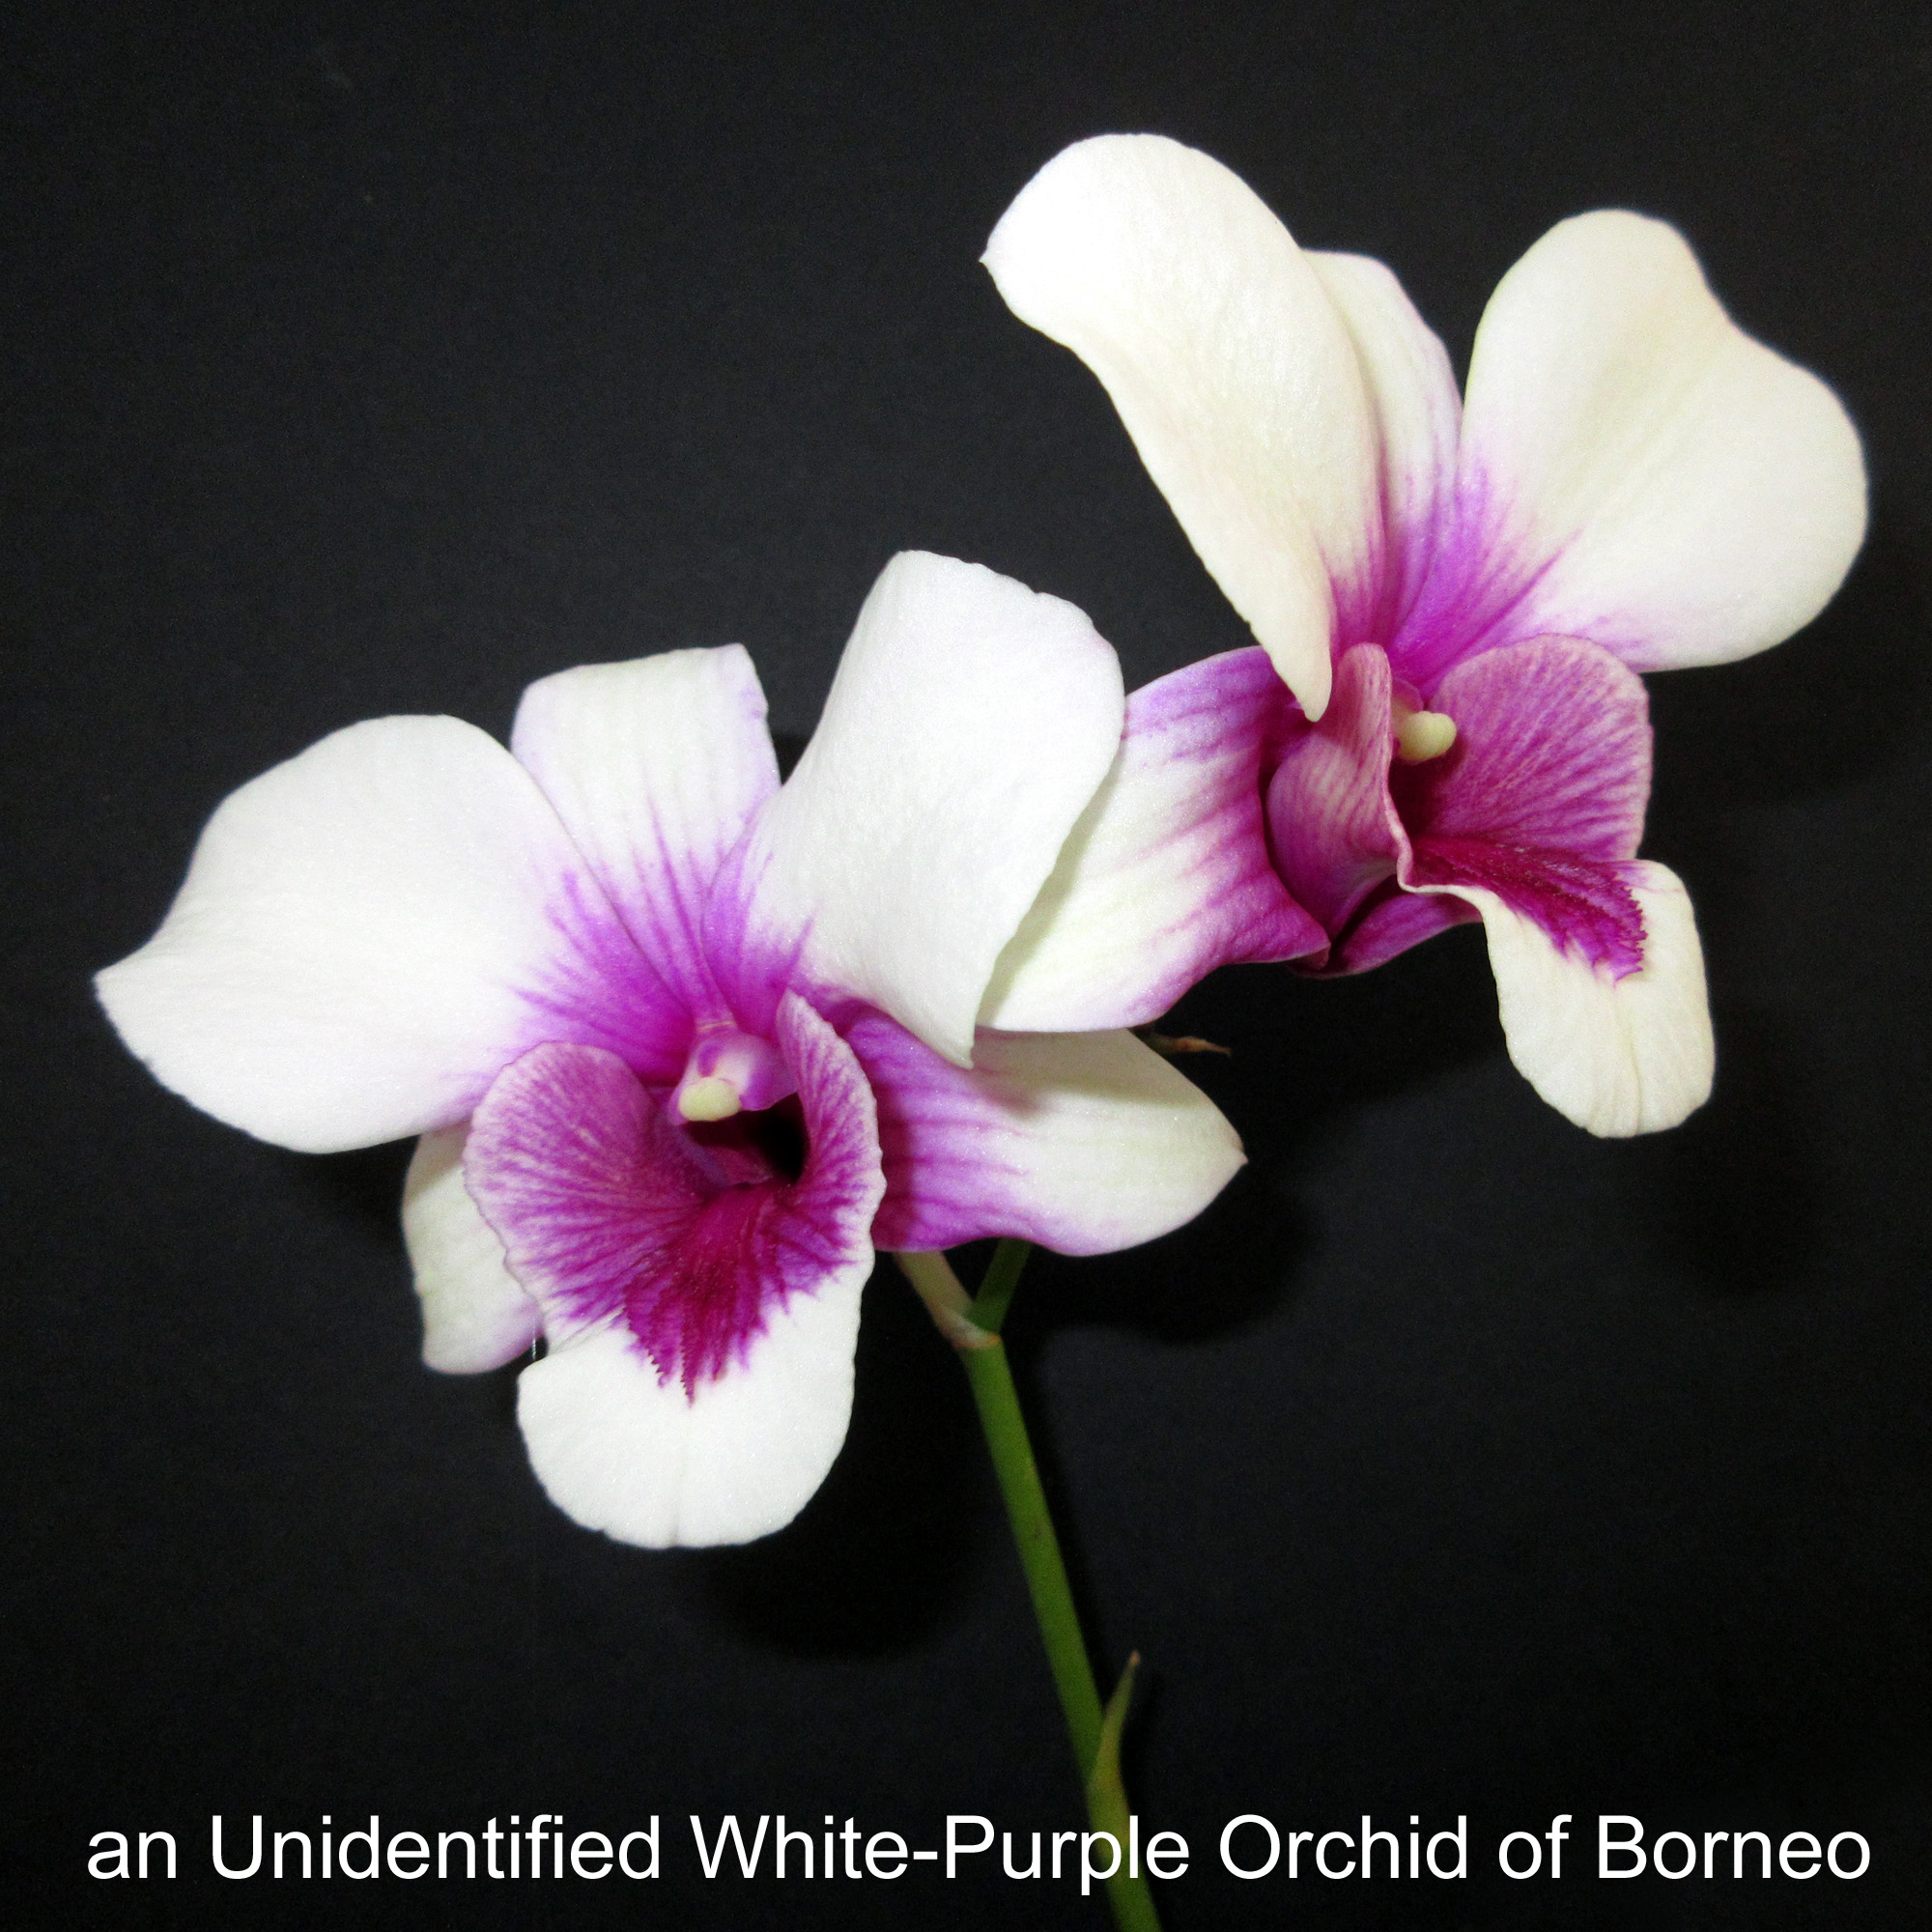 an Unidentified White-Purple Orchid of Borneo